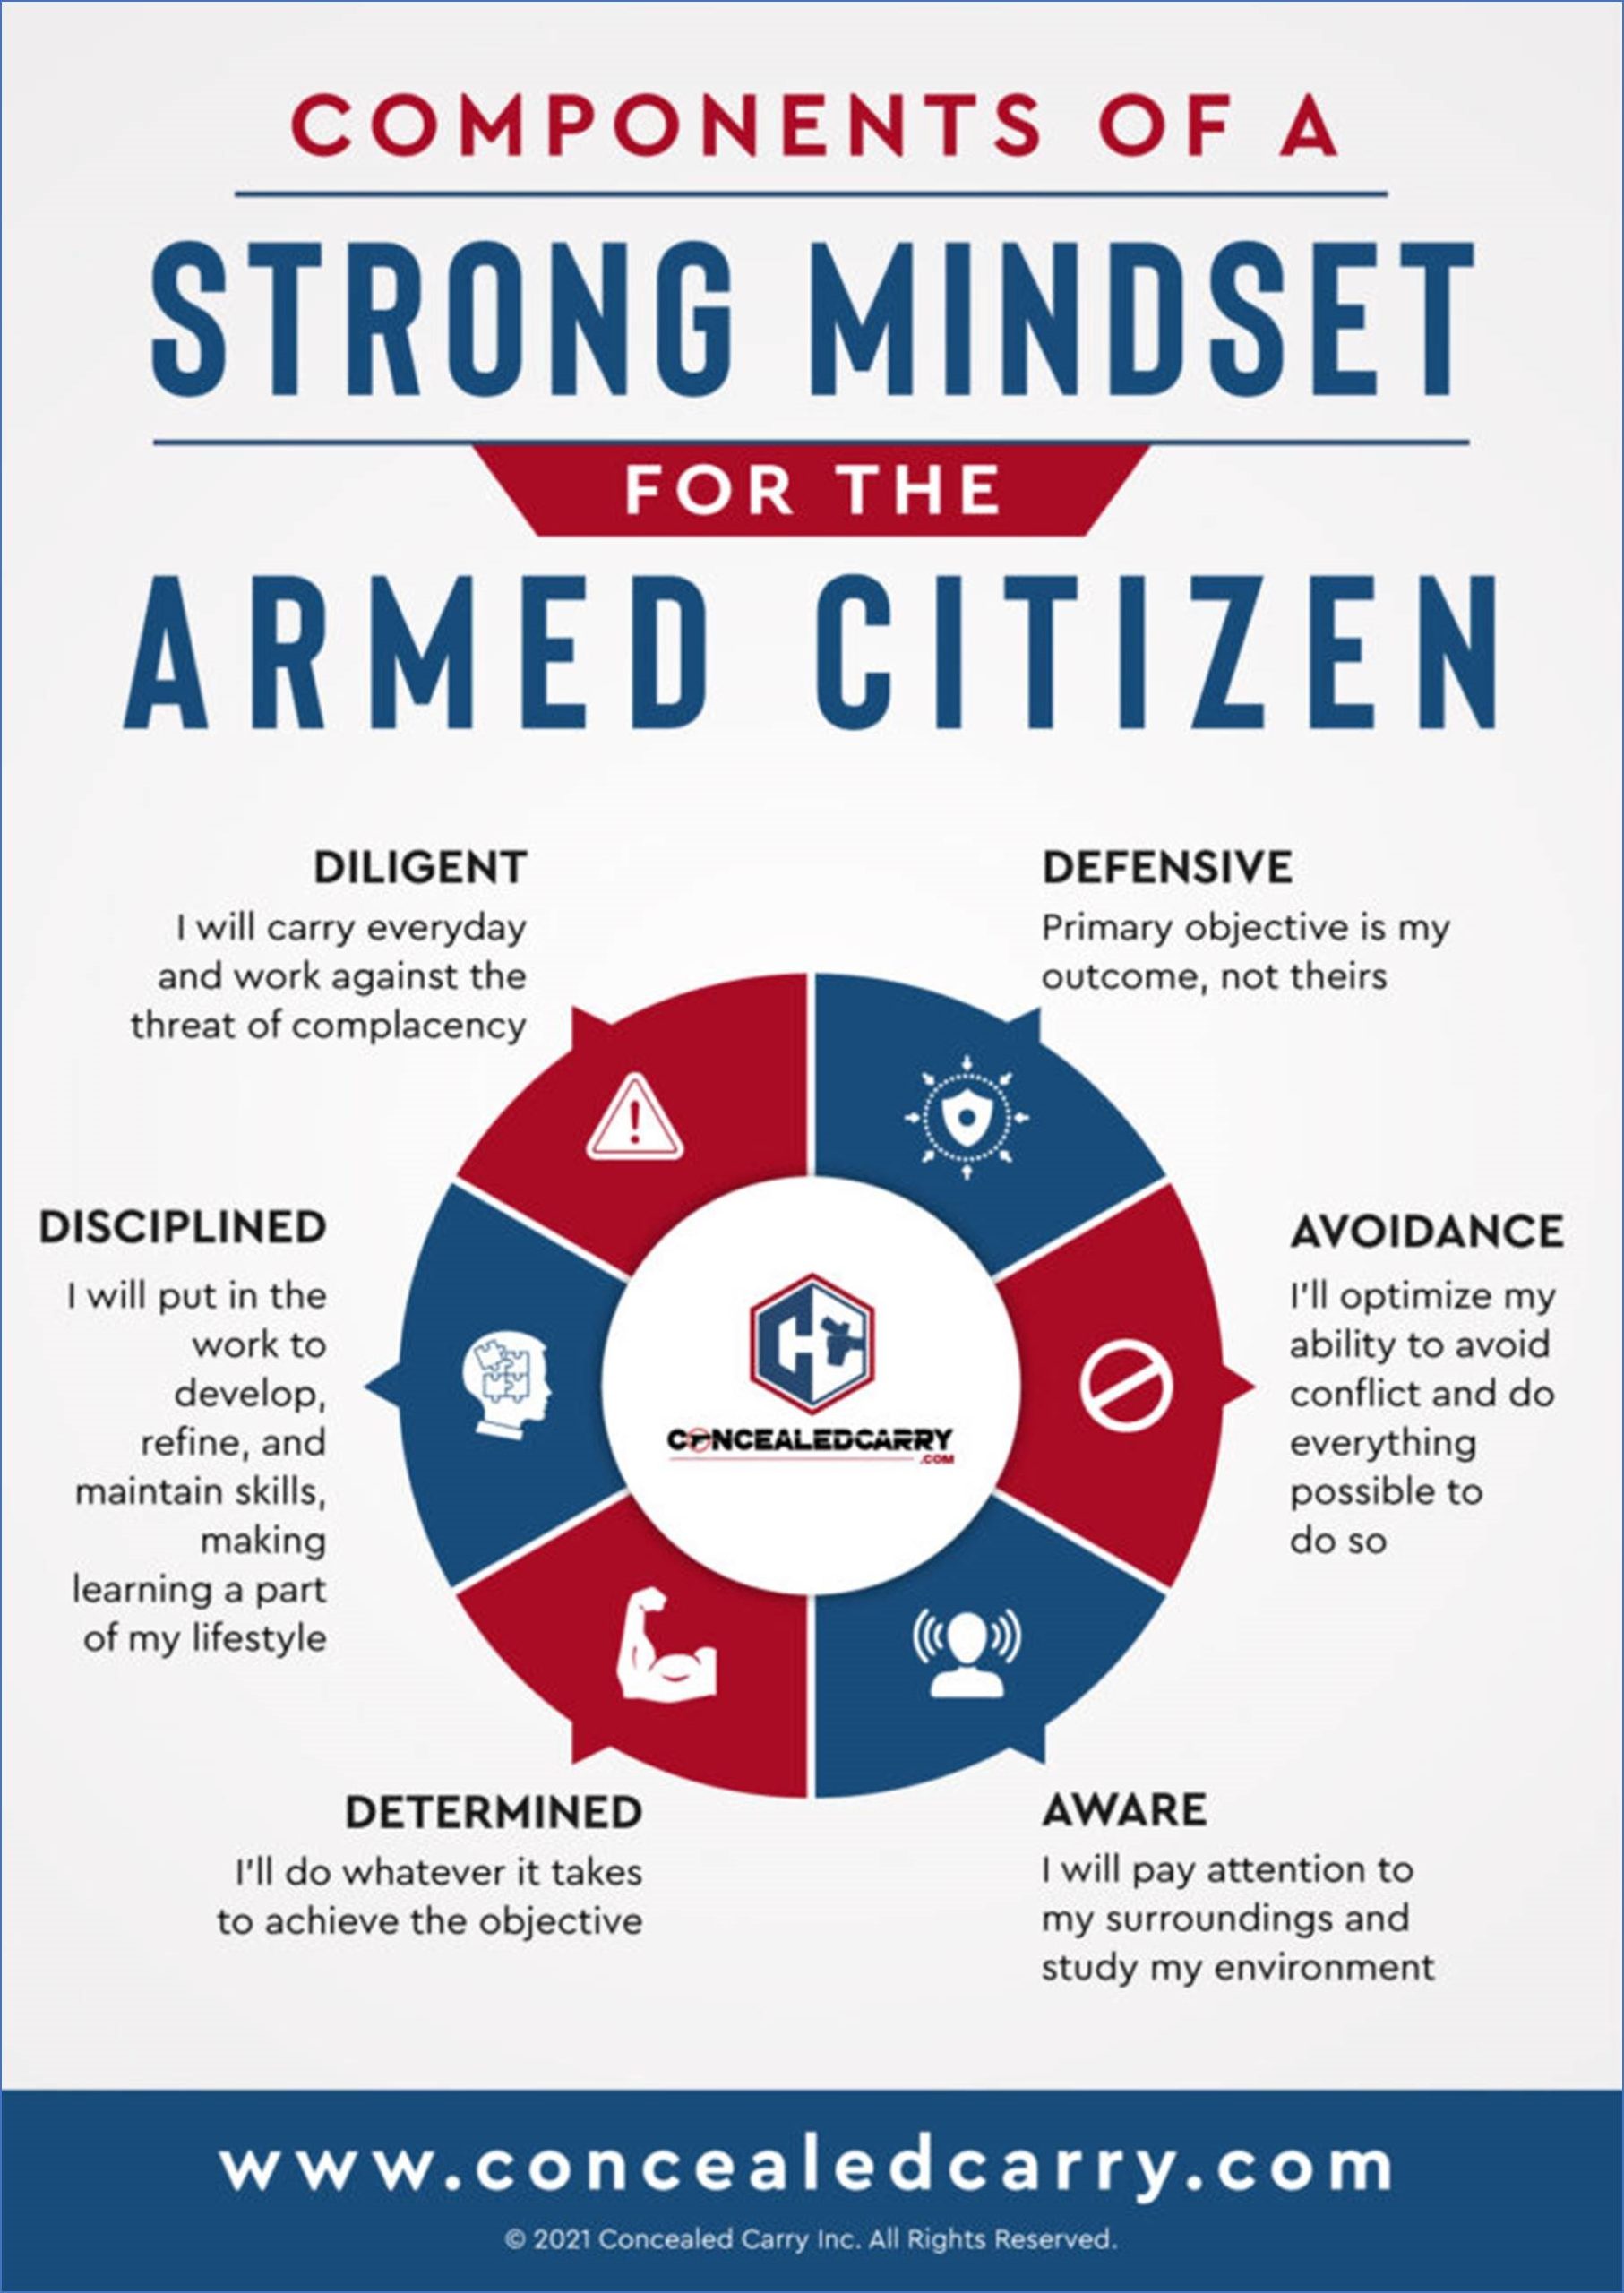 Components of a Strong Mindset for the Armed Citizen by ConcealedCarry.com